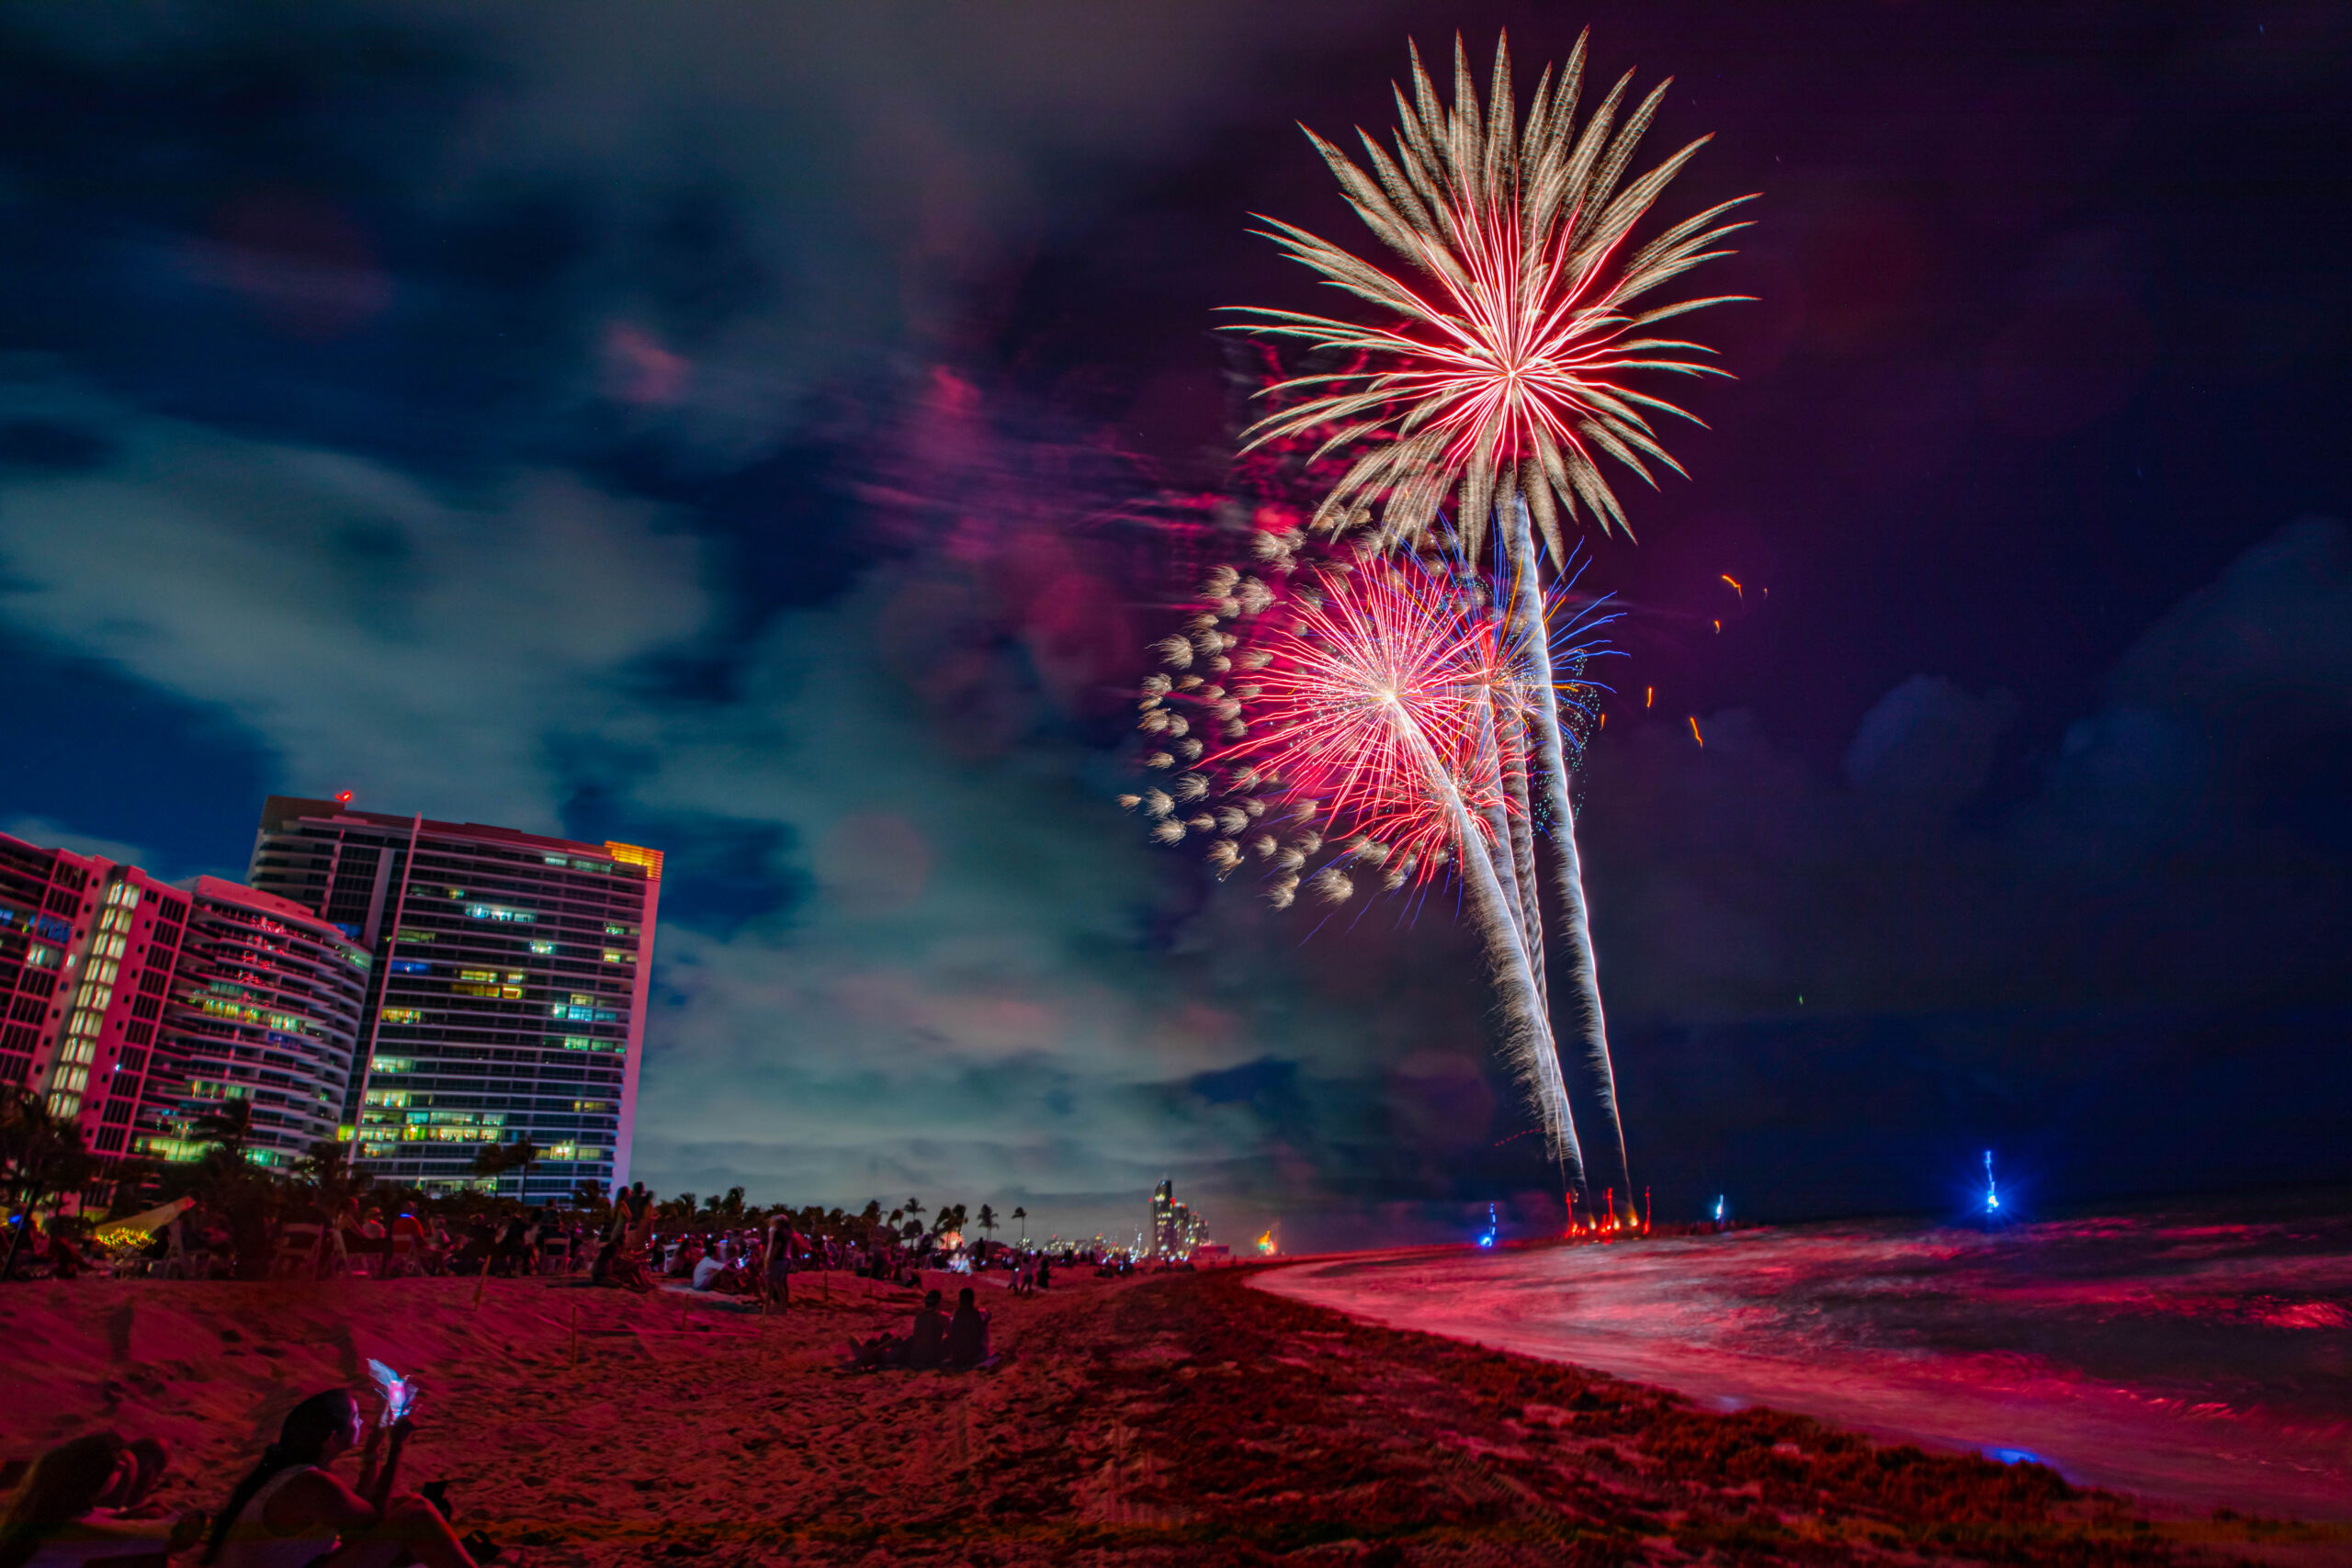 Fireworks off the jetty in Bal Harbour